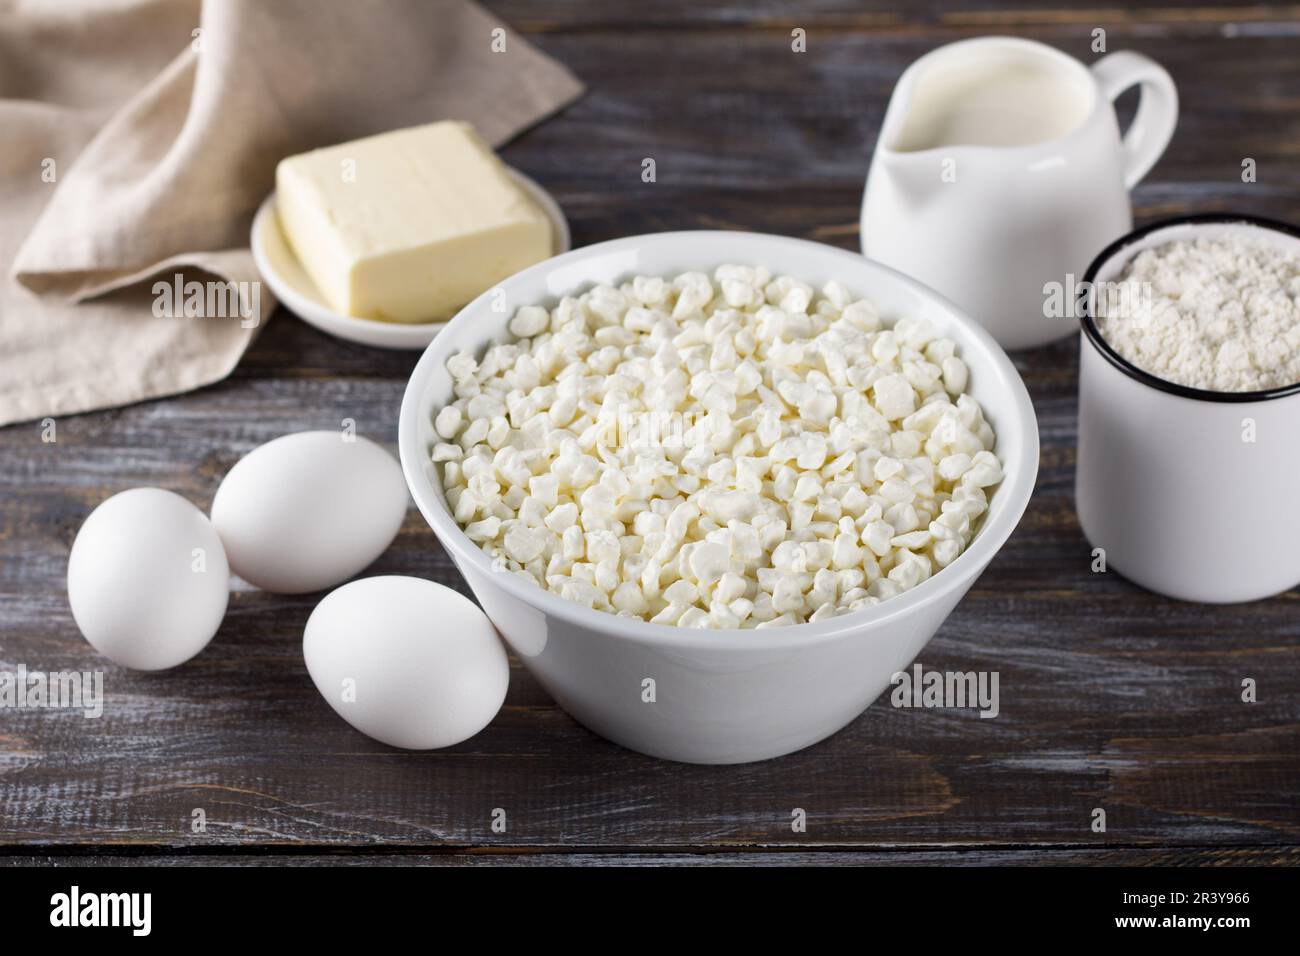 Bowl with cottage cheese, eggs, flour, butter, milk on a wooden background Stock Photo